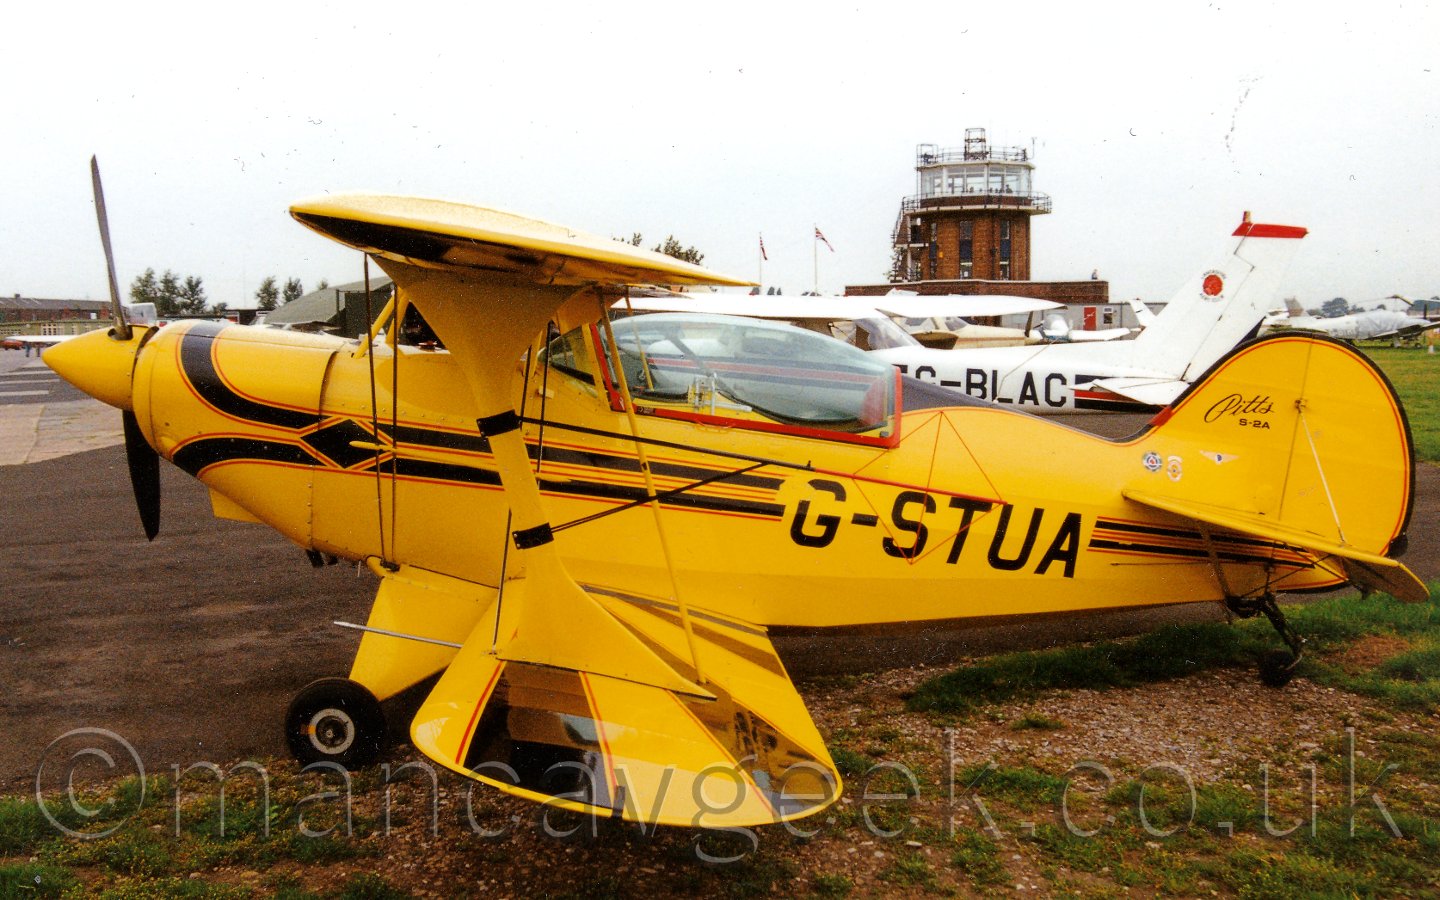 Side view of a single engined, single seat biplane parked facing to the left. The plane is mostly yellow, with a pair of black stripes outlined in red running along the body, overlaid on the rear fuselage with the registration "G-STUA". The wings are staggered, the top one being quite a bit further forward than the bottom one. In the background, a selection of other light aircraft are parked, with a brown tower with a fully glazed room at the top in the distance. The sky above and behind everything is a hazy grey.